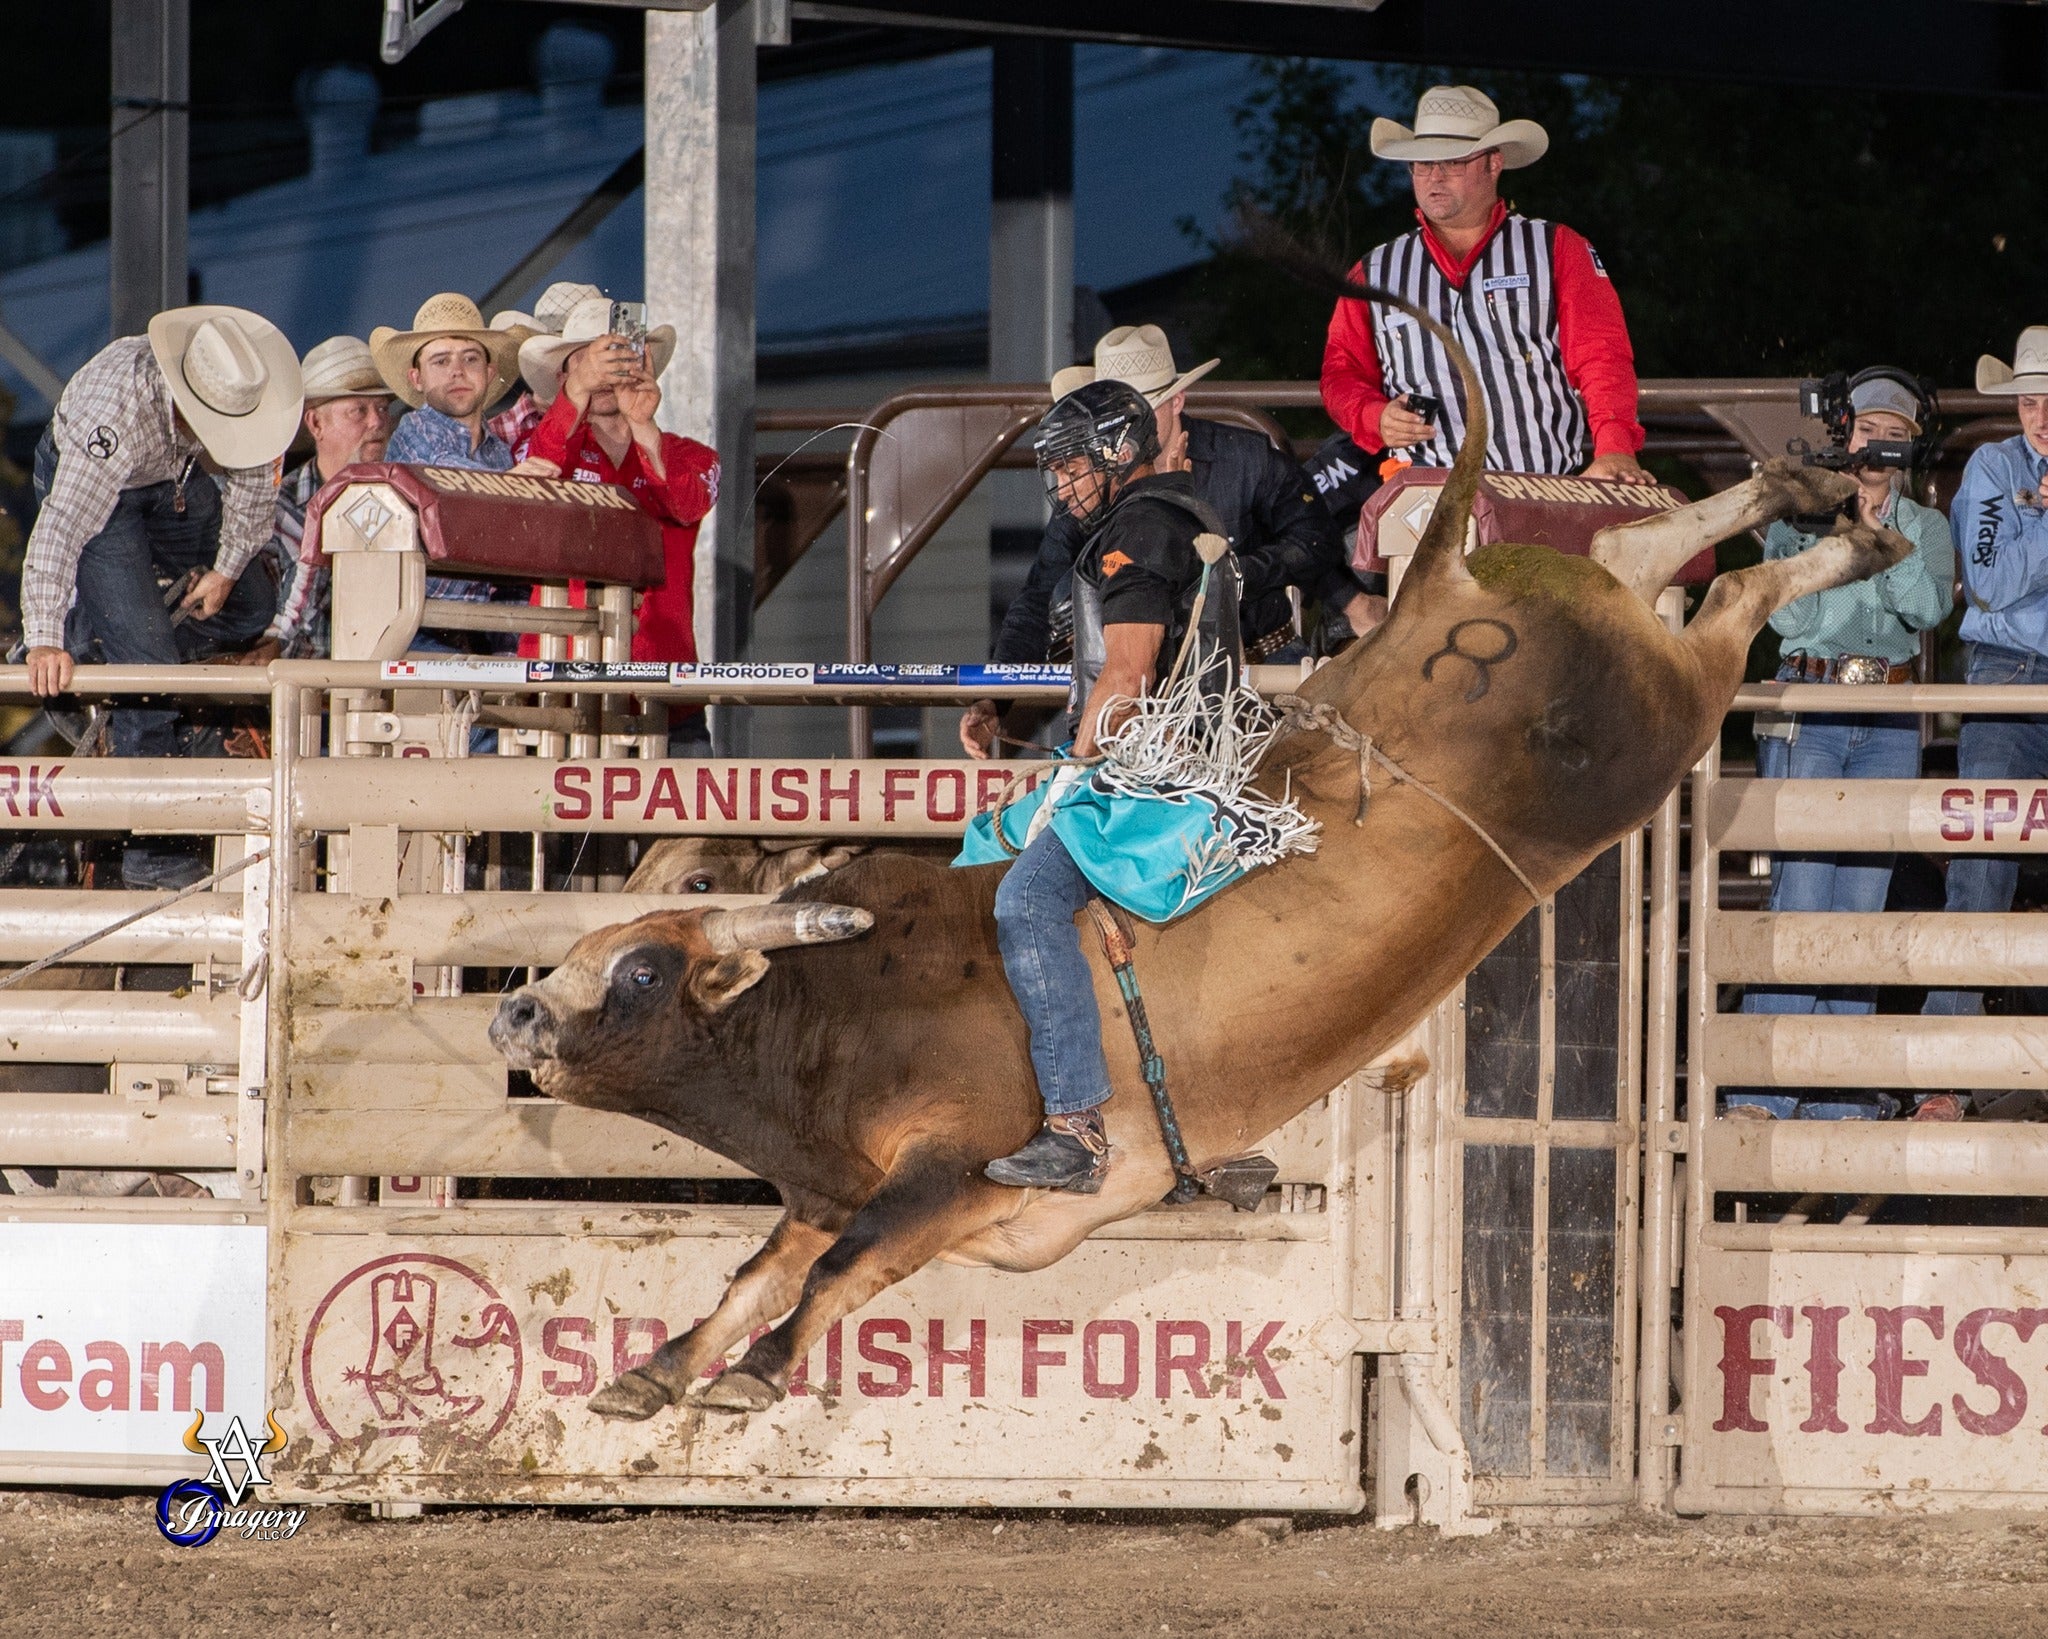 Spanish Fork Fiesta Days Rodeo Hall of Fame